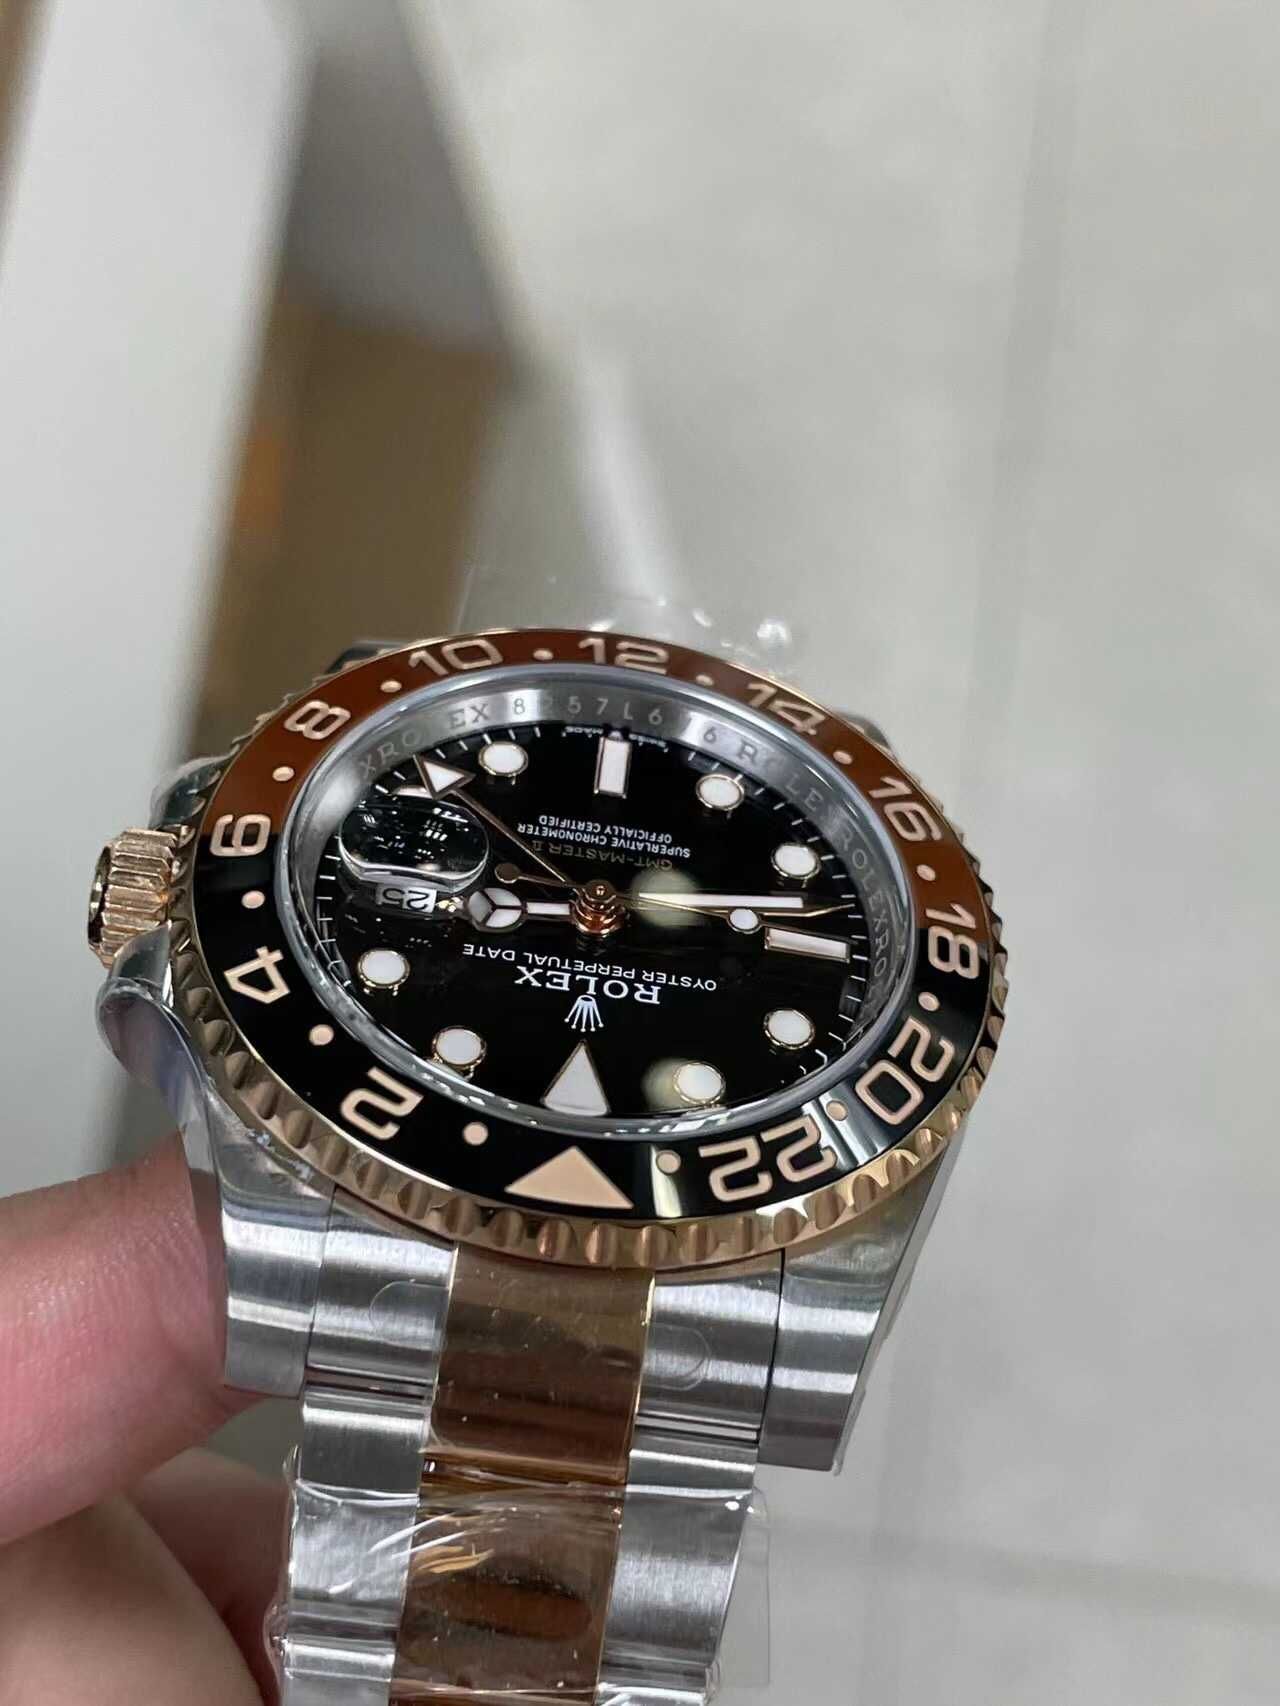 Rolex Gmt-master Silver-Gold Rose